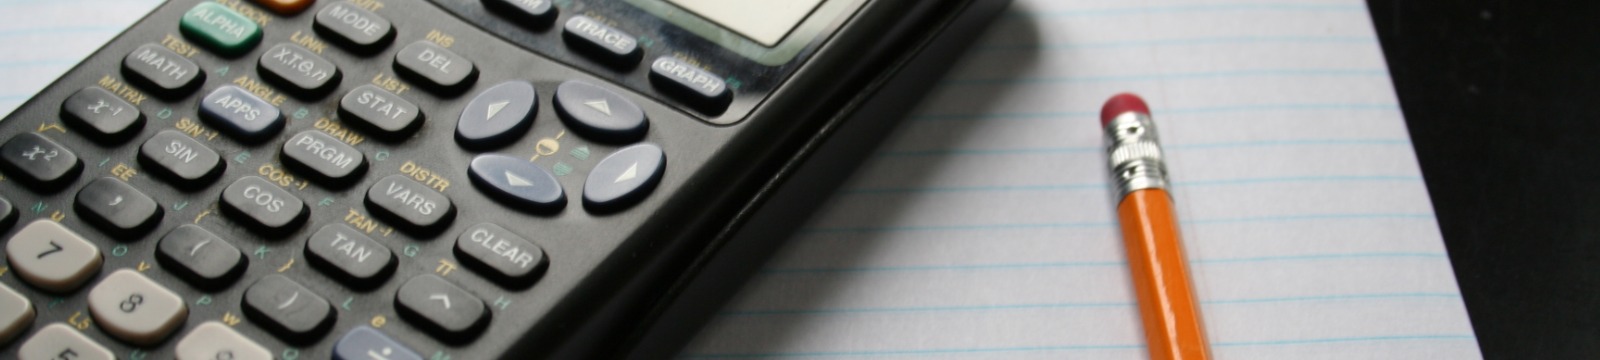 Picture of a calculator with a pencil and paper